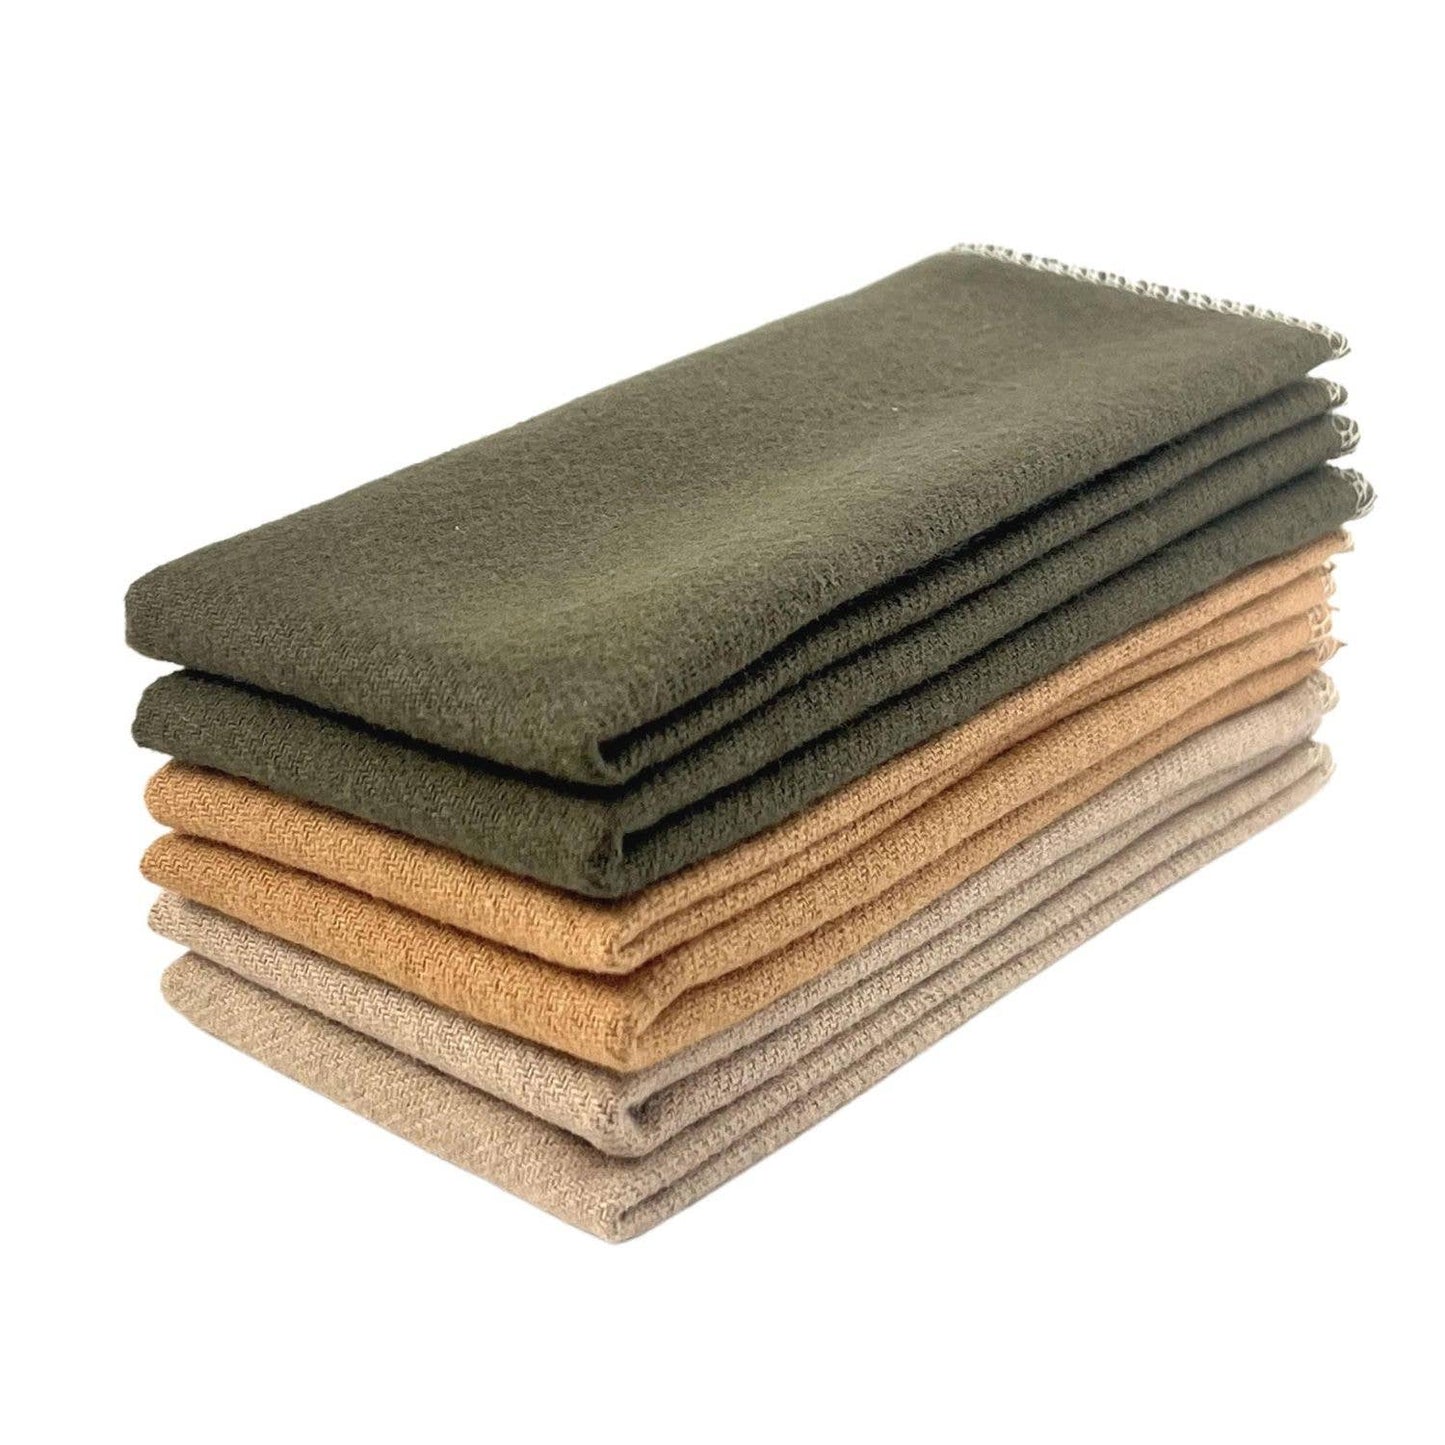 Organic Brushed Cotton Non•Paper Towels: 6-pk / Earth Tones